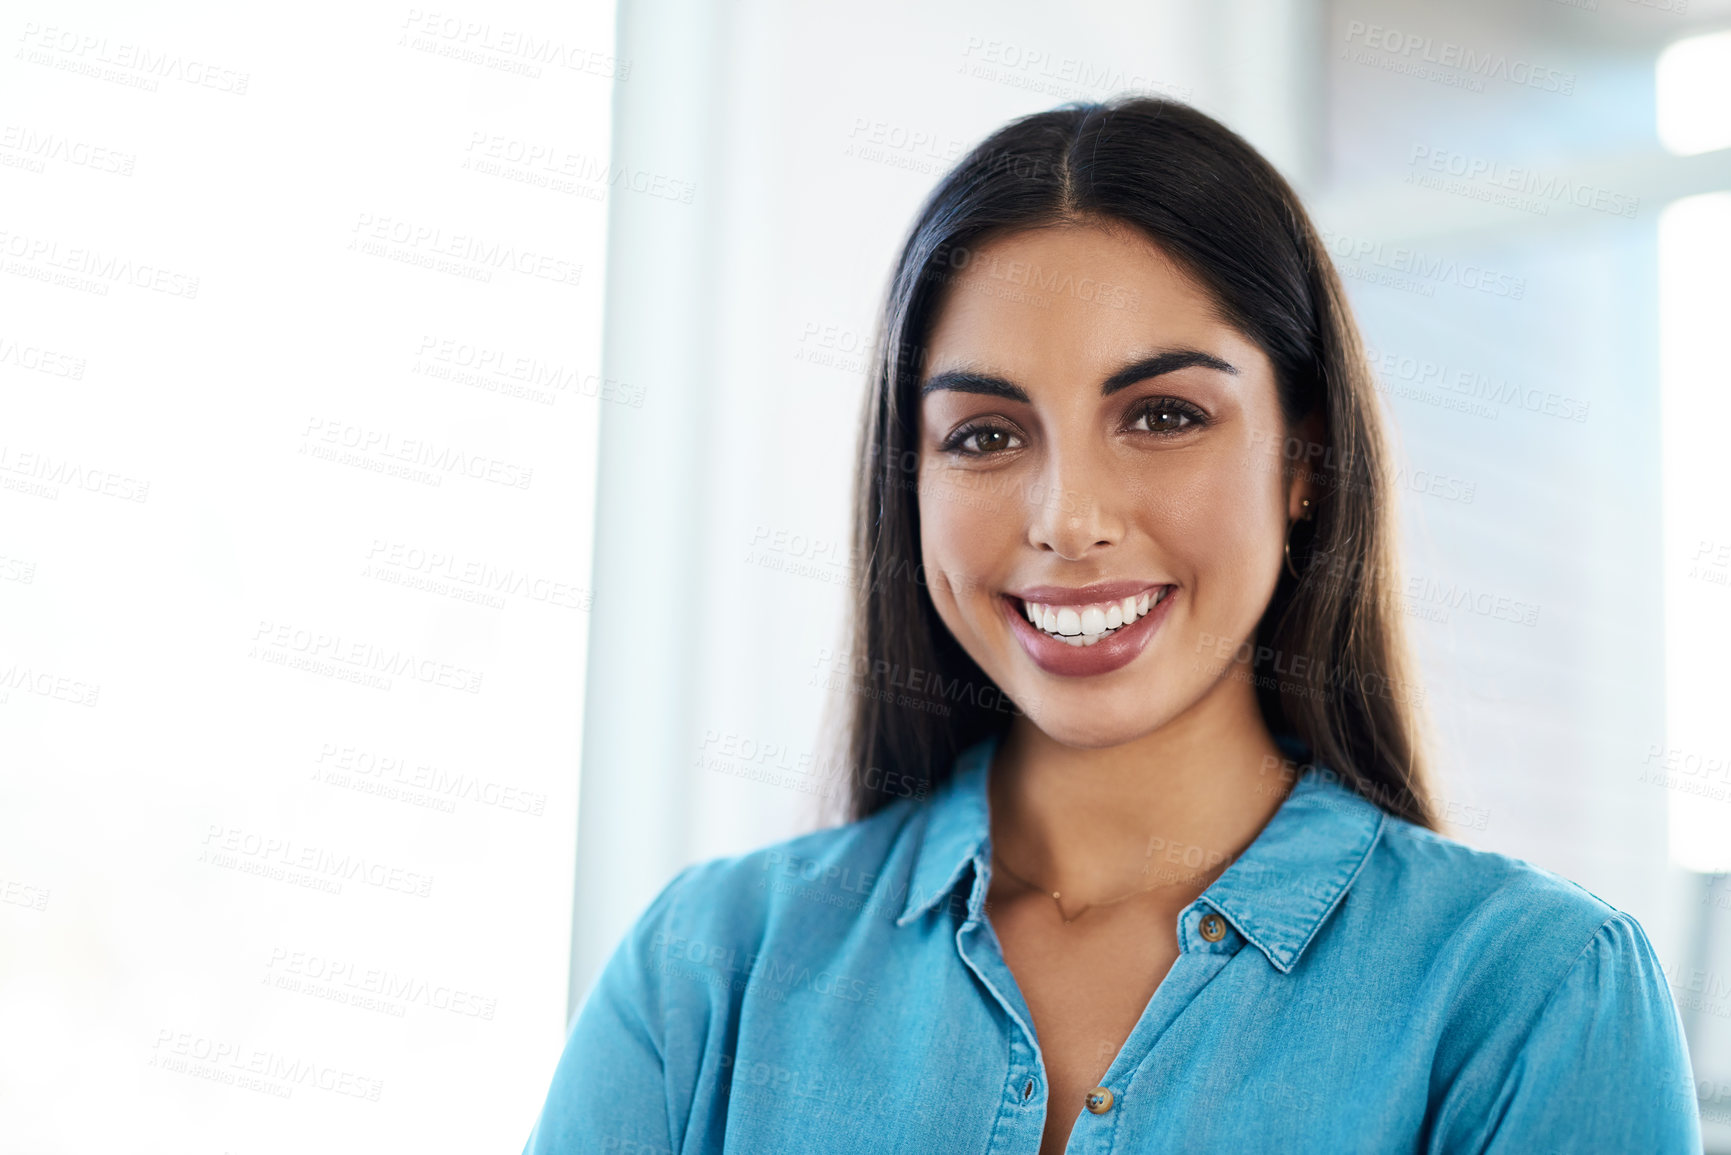 Buy stock photo Portrait of an attractive young businesswoman standing in an office